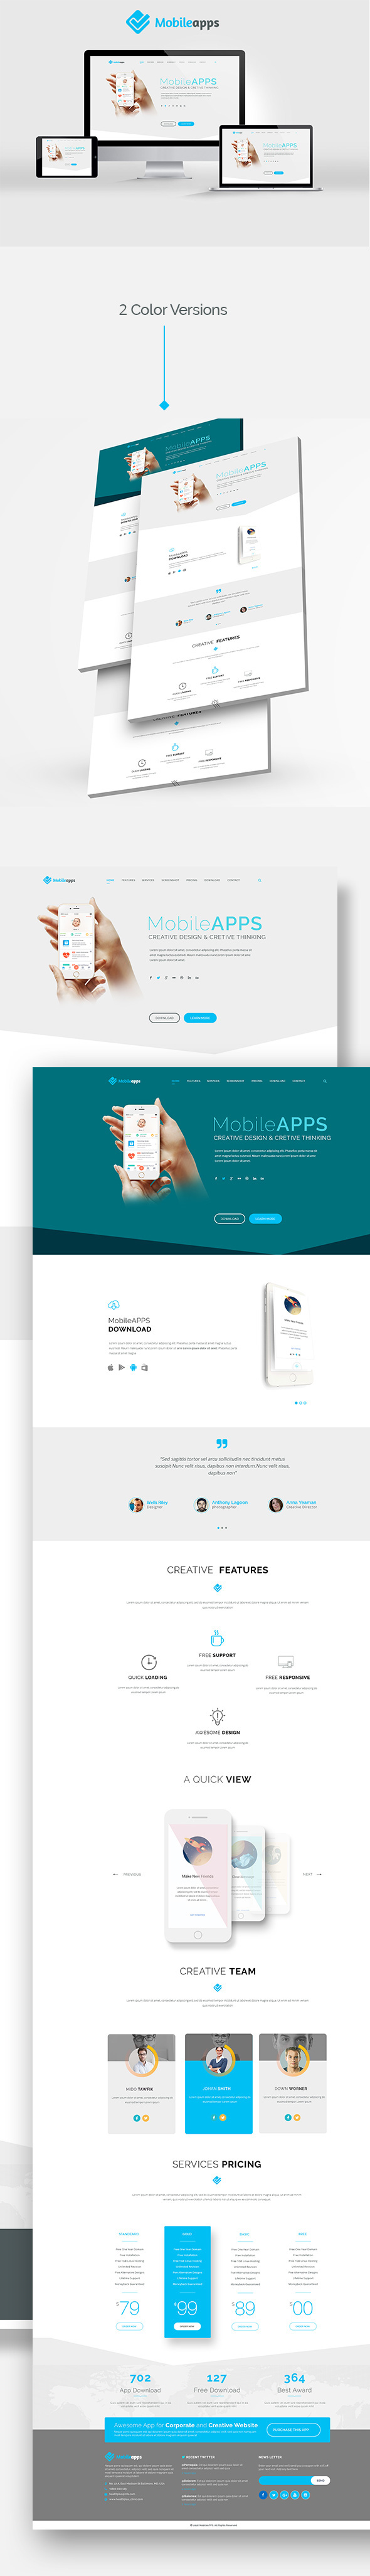 app demo app New Psd store Apps PSD template landing page material design mobile app promotion Mockup Multipurpose One Page psd Phone App